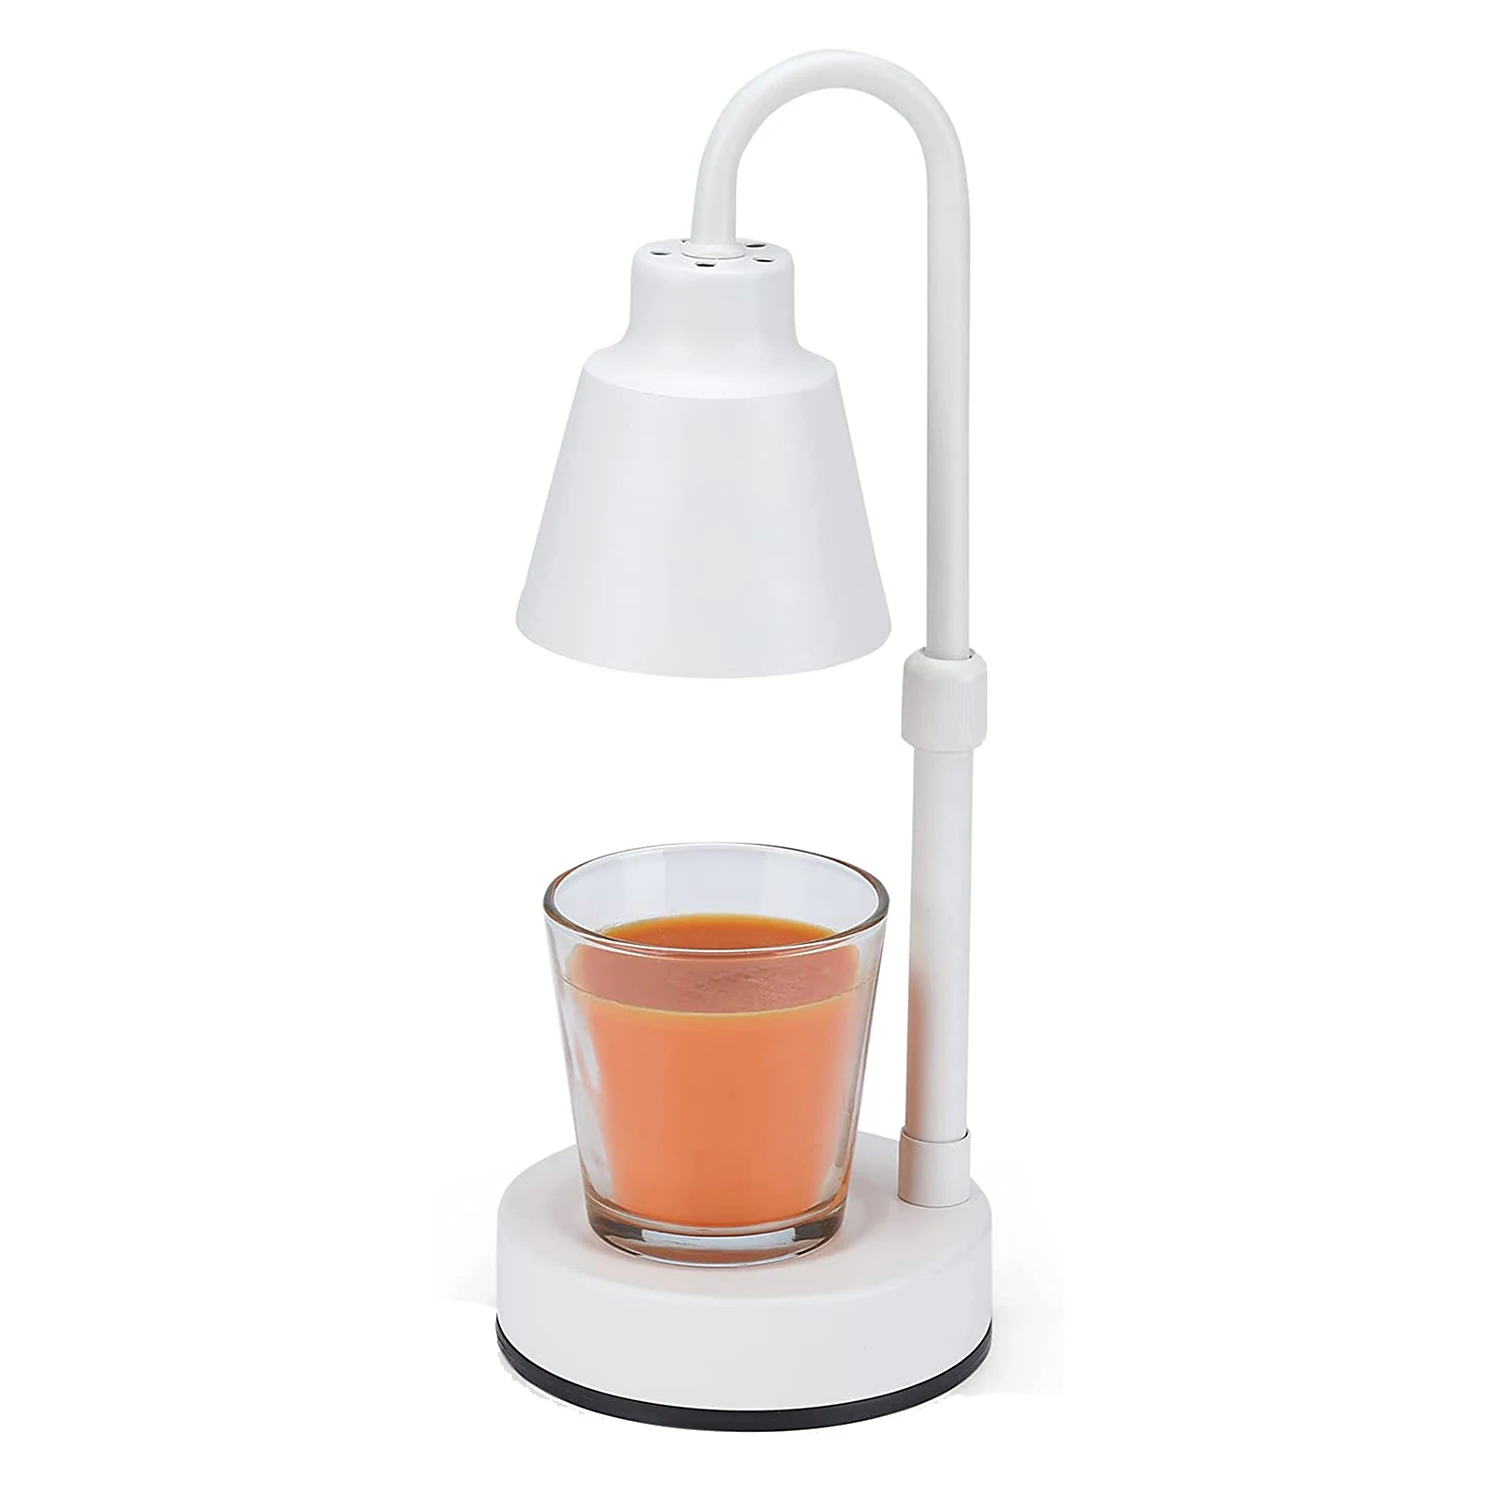 

Candle Lamp for Jar Candle,Wax Warmer Lamp Adjustable Heat & Height No Flame Candle Melter,with 2 Bulbs White US Plug